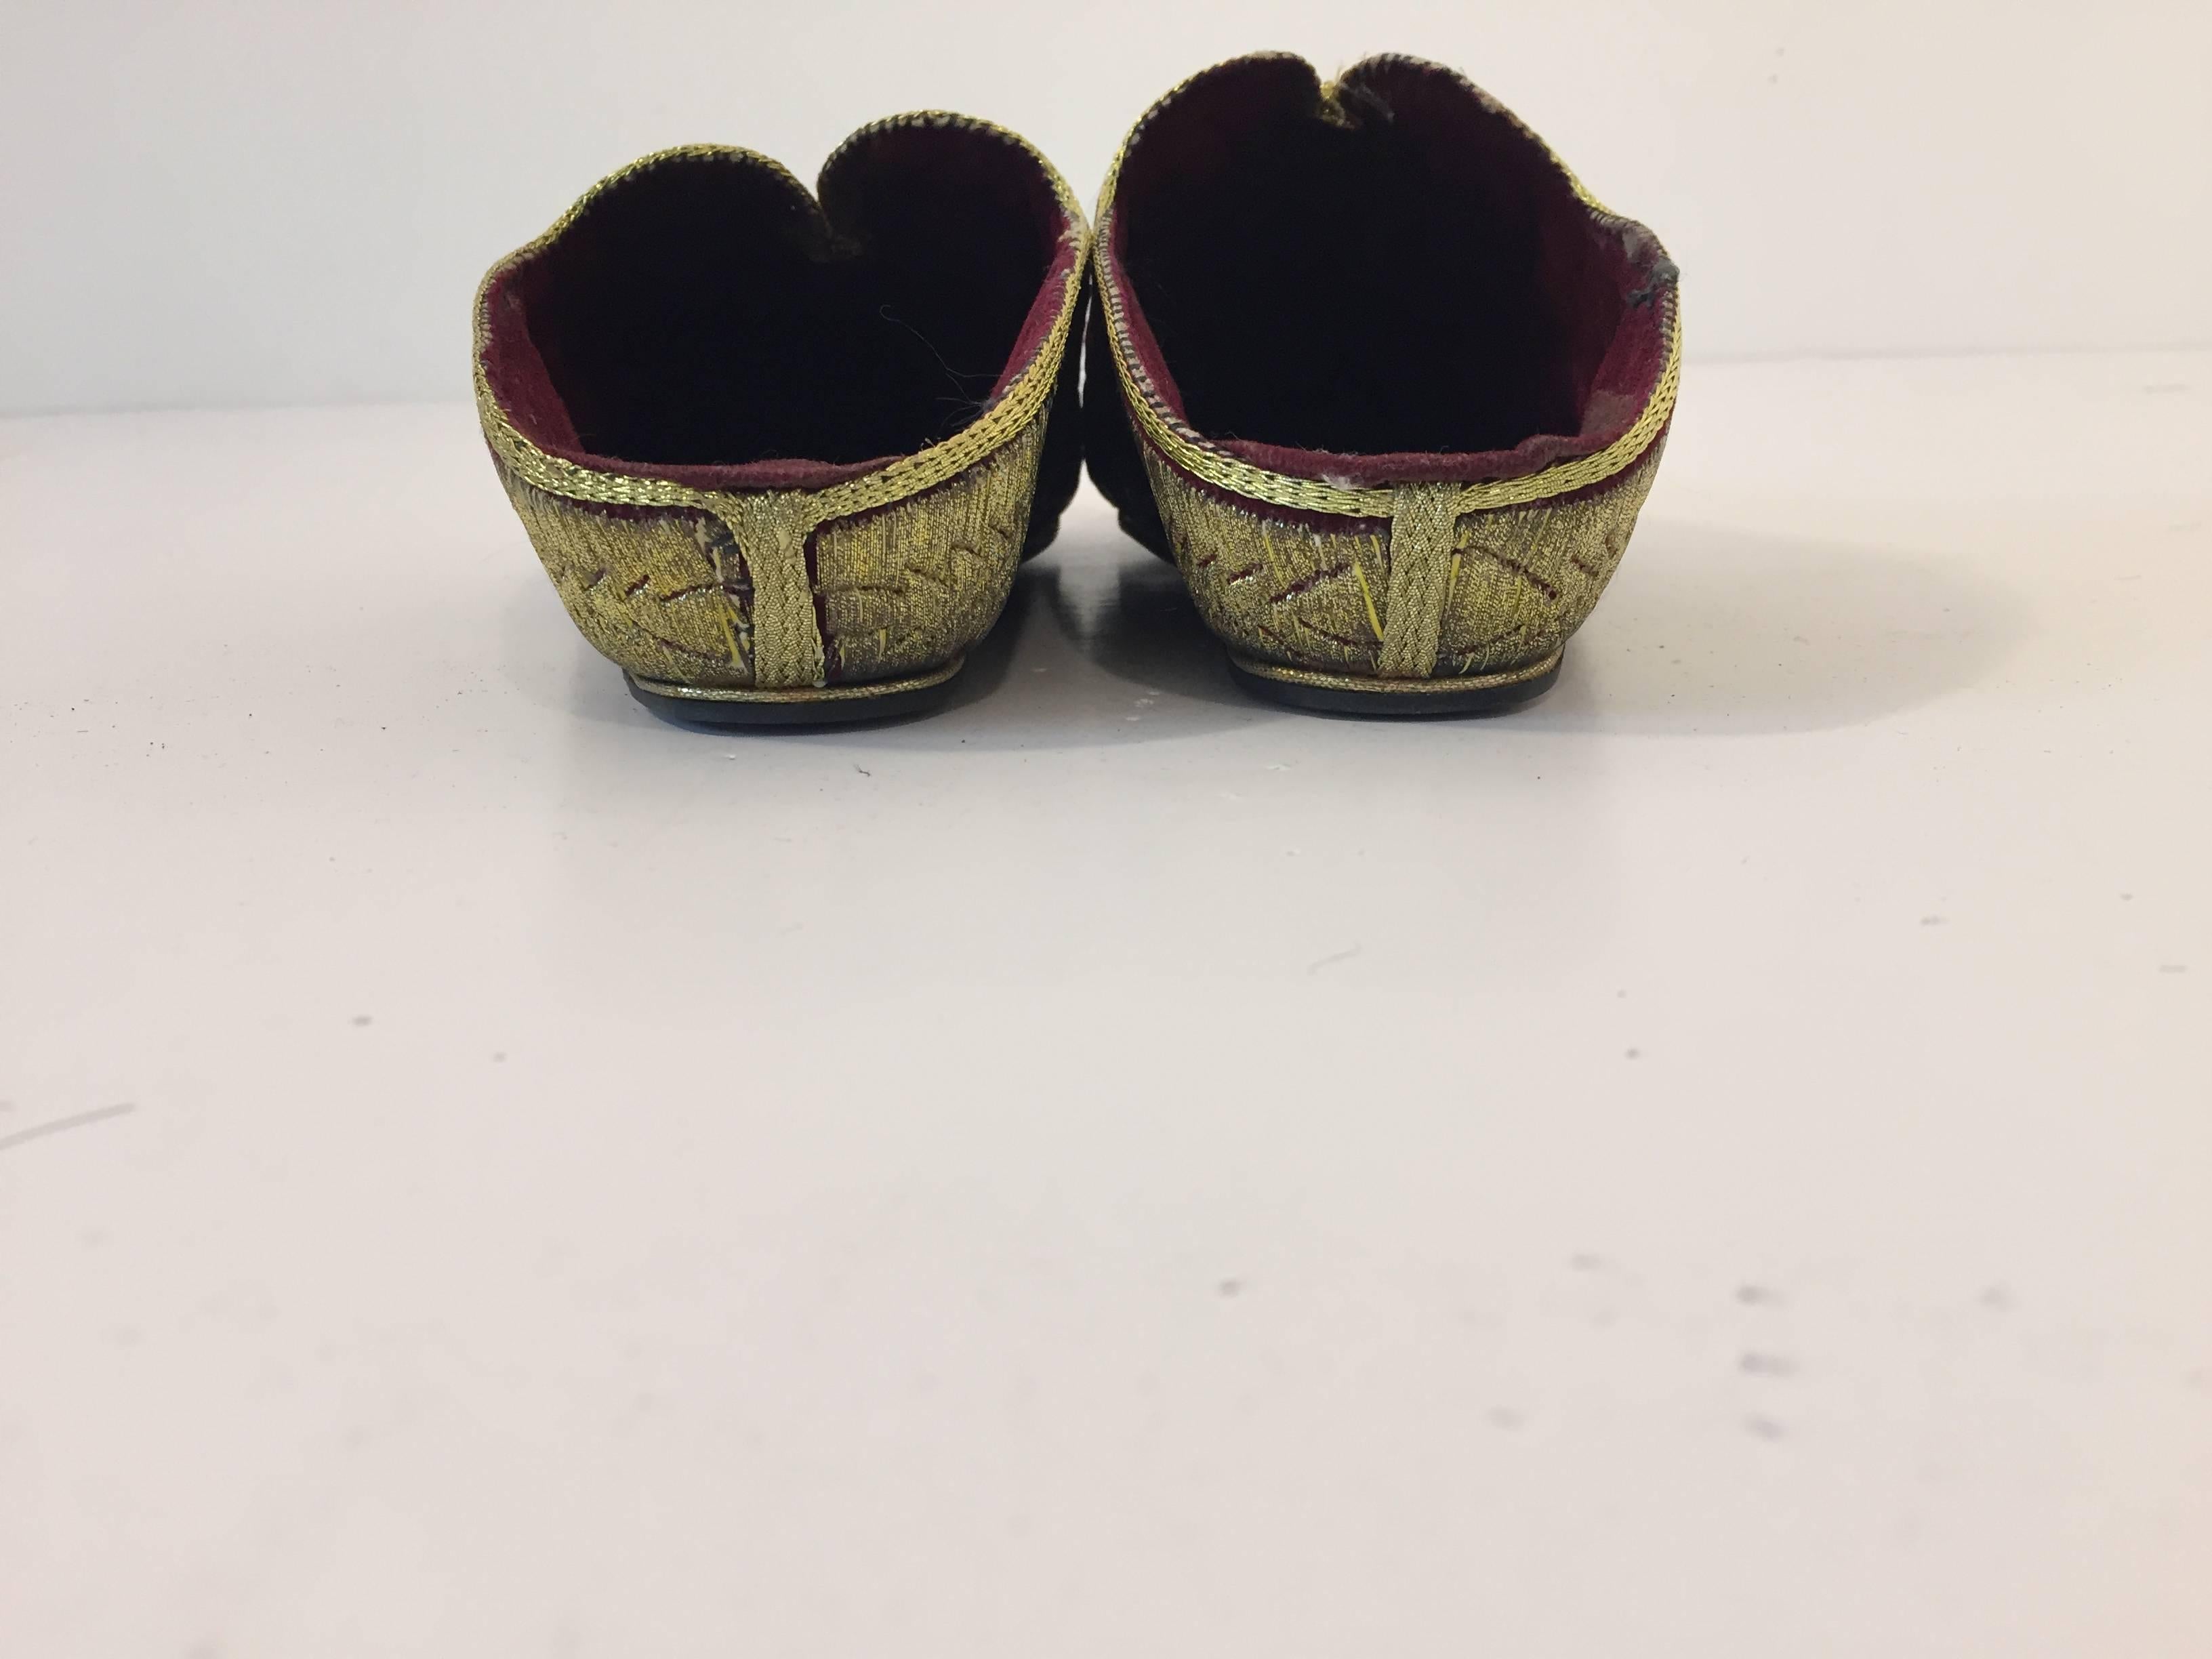 Turkish Velvet Embroidered with Gold Metallic Thread Slippers Shoes In Good Condition For Sale In North Hollywood, CA